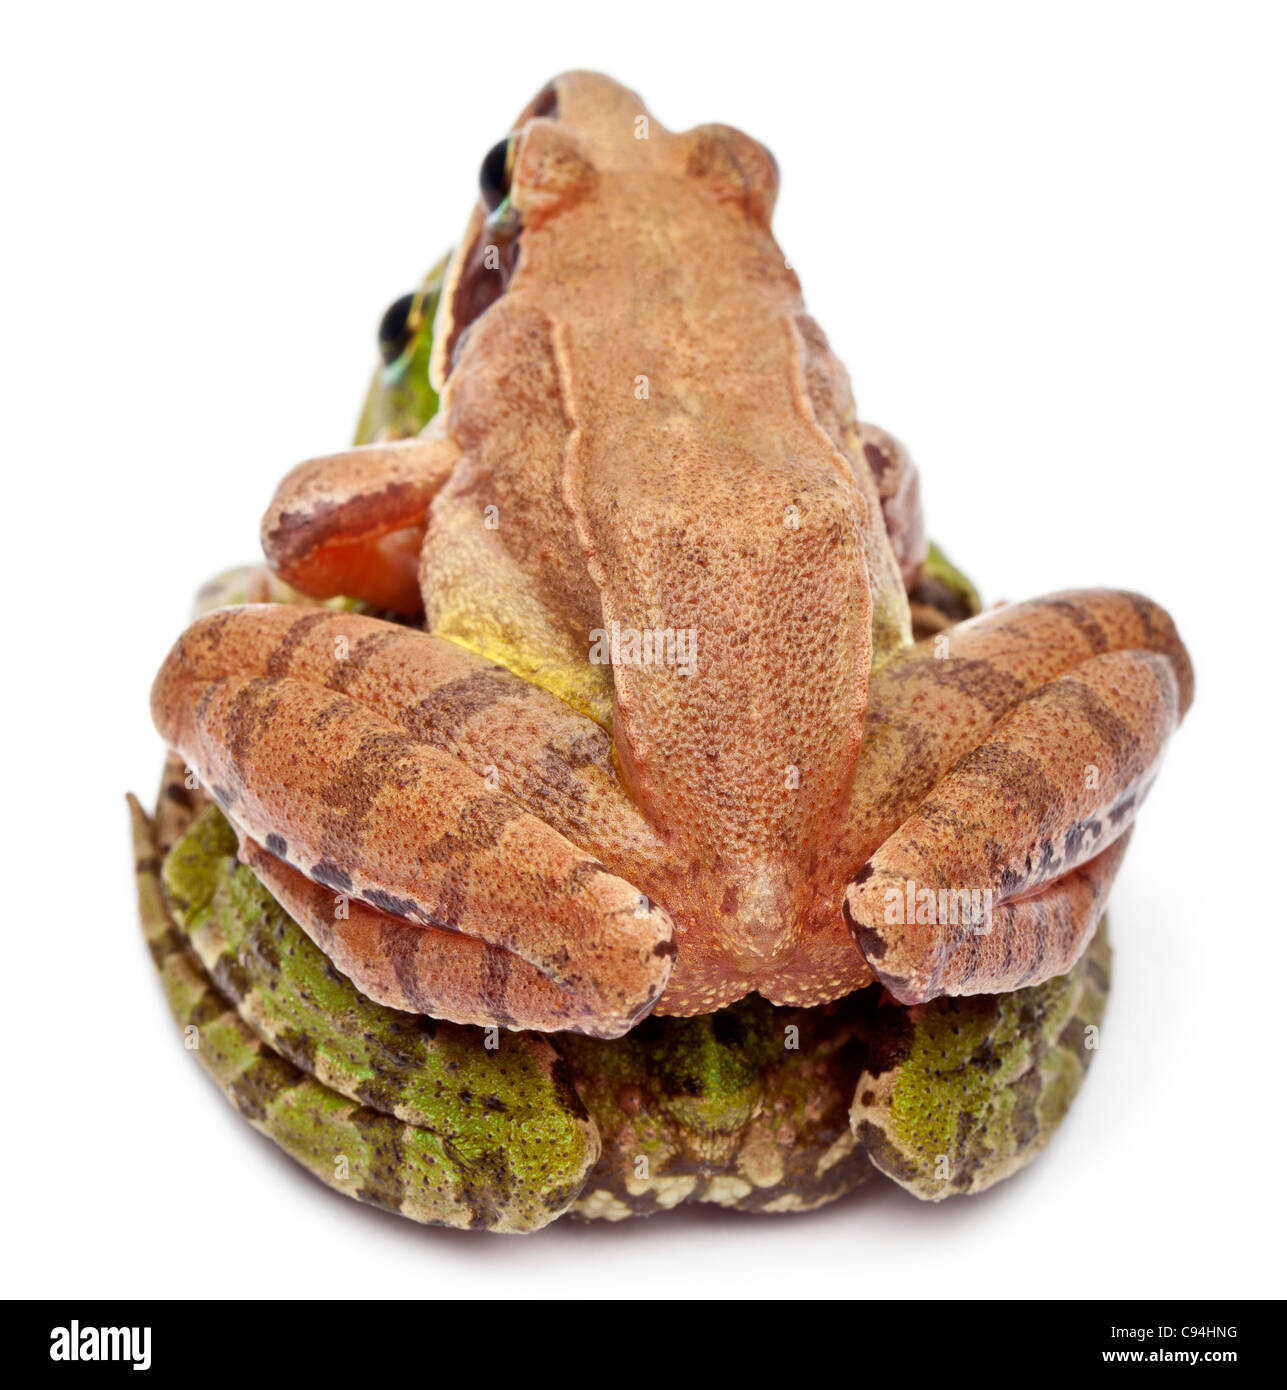 Common European frog or Edible Frog, Rana esculenta, and a Moor Frog, Rana arvalis, in front of white background Stock Photo